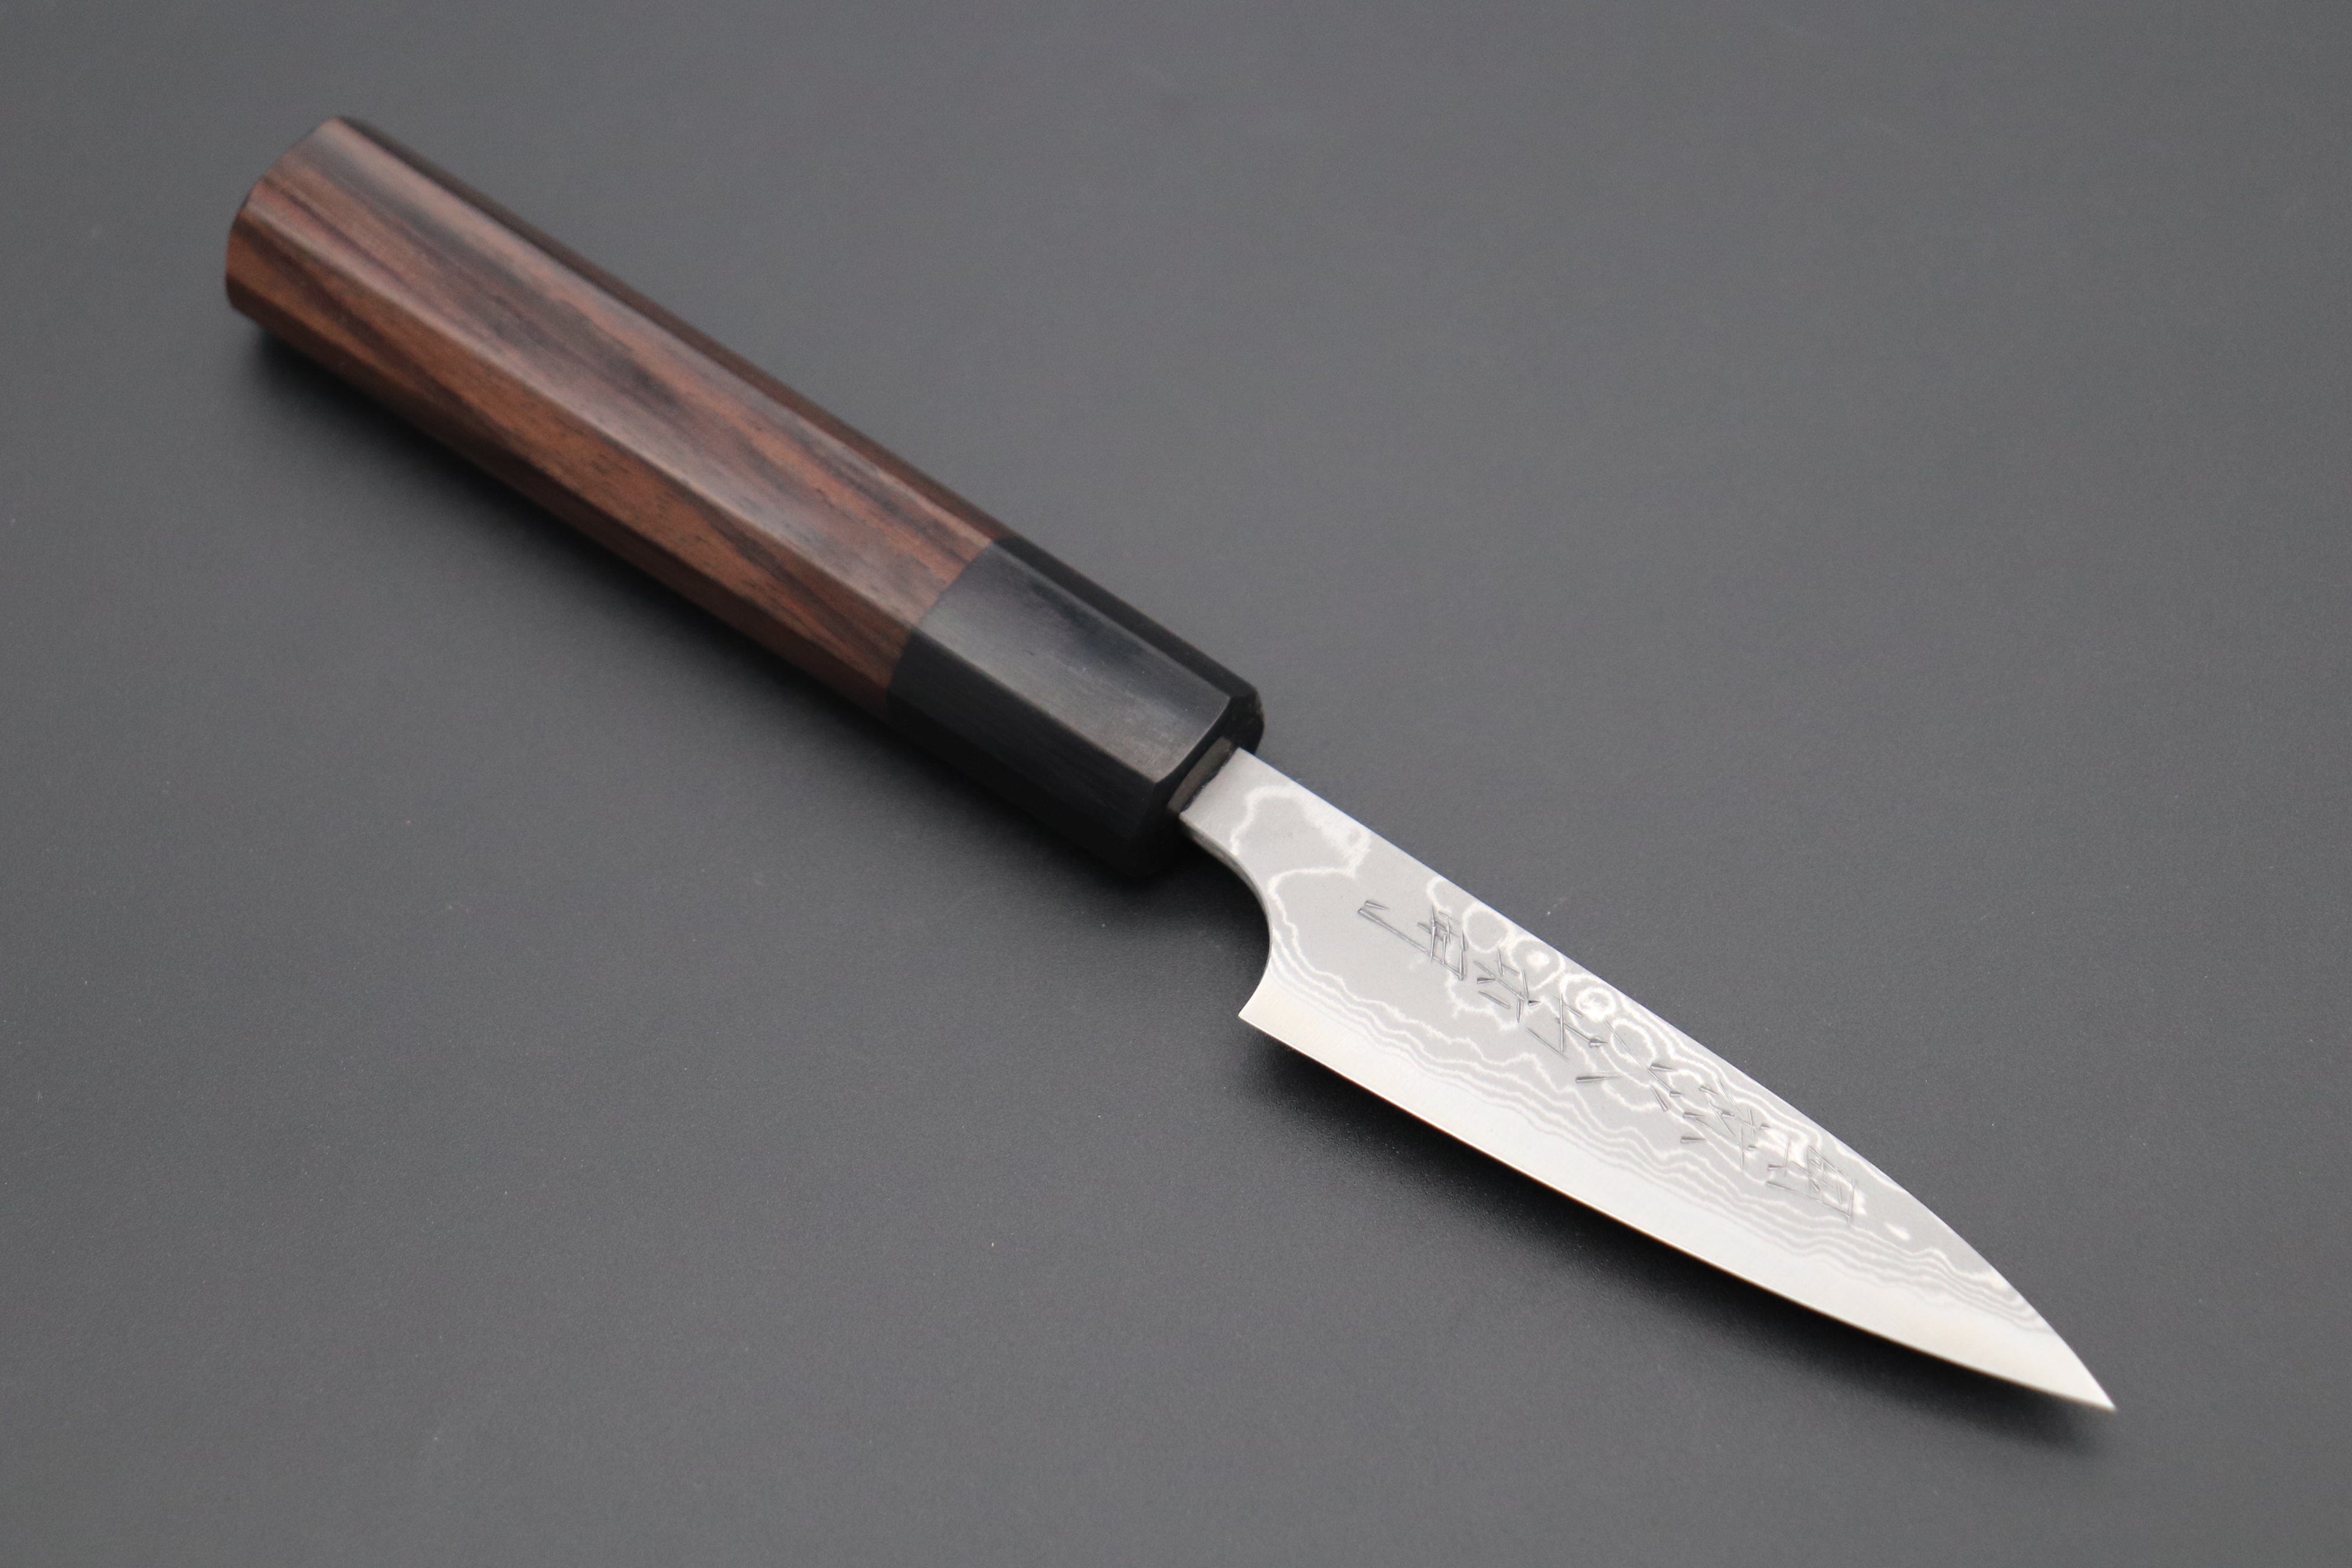 Paring Knife, 3.5 Inch | Brown & Grey ABS Handle